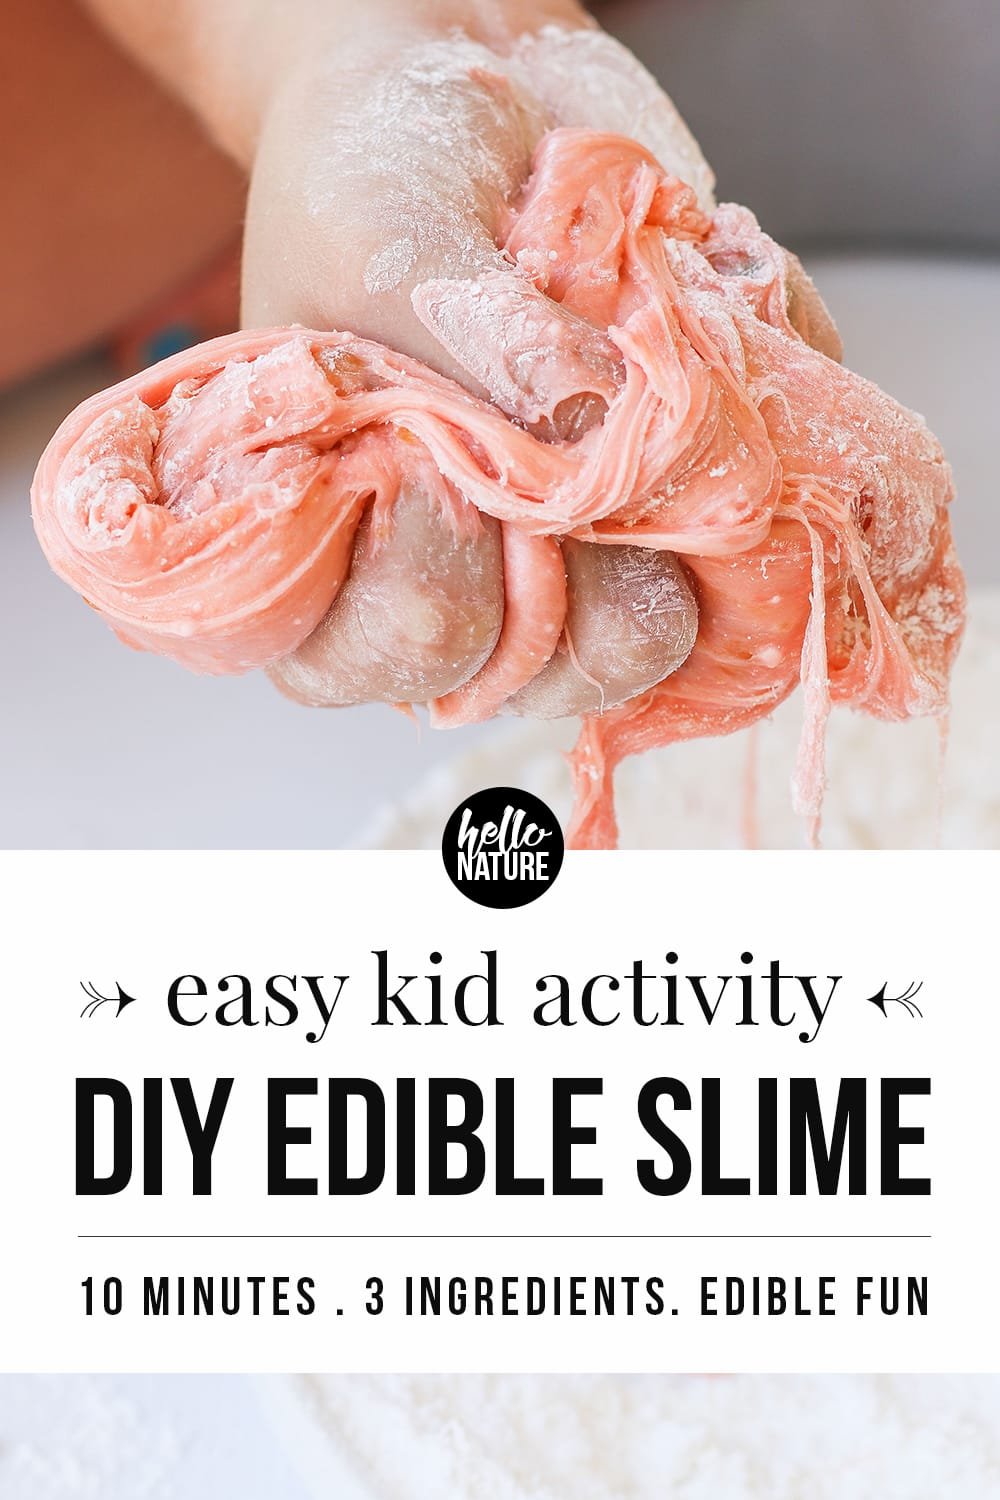 Edible slime is easy to make with just a few ingredients. Learn how to make this easy slime recipe in less than 10 minutes. Gummy worm lovers can't miss this fun kid activity! #EdibleSlime #SlimeDIY #EdibleCrafts #ToddlerActivities #KidActivities #IndoorKidActivities #RainyDayActivities #3Ingredients #Slime